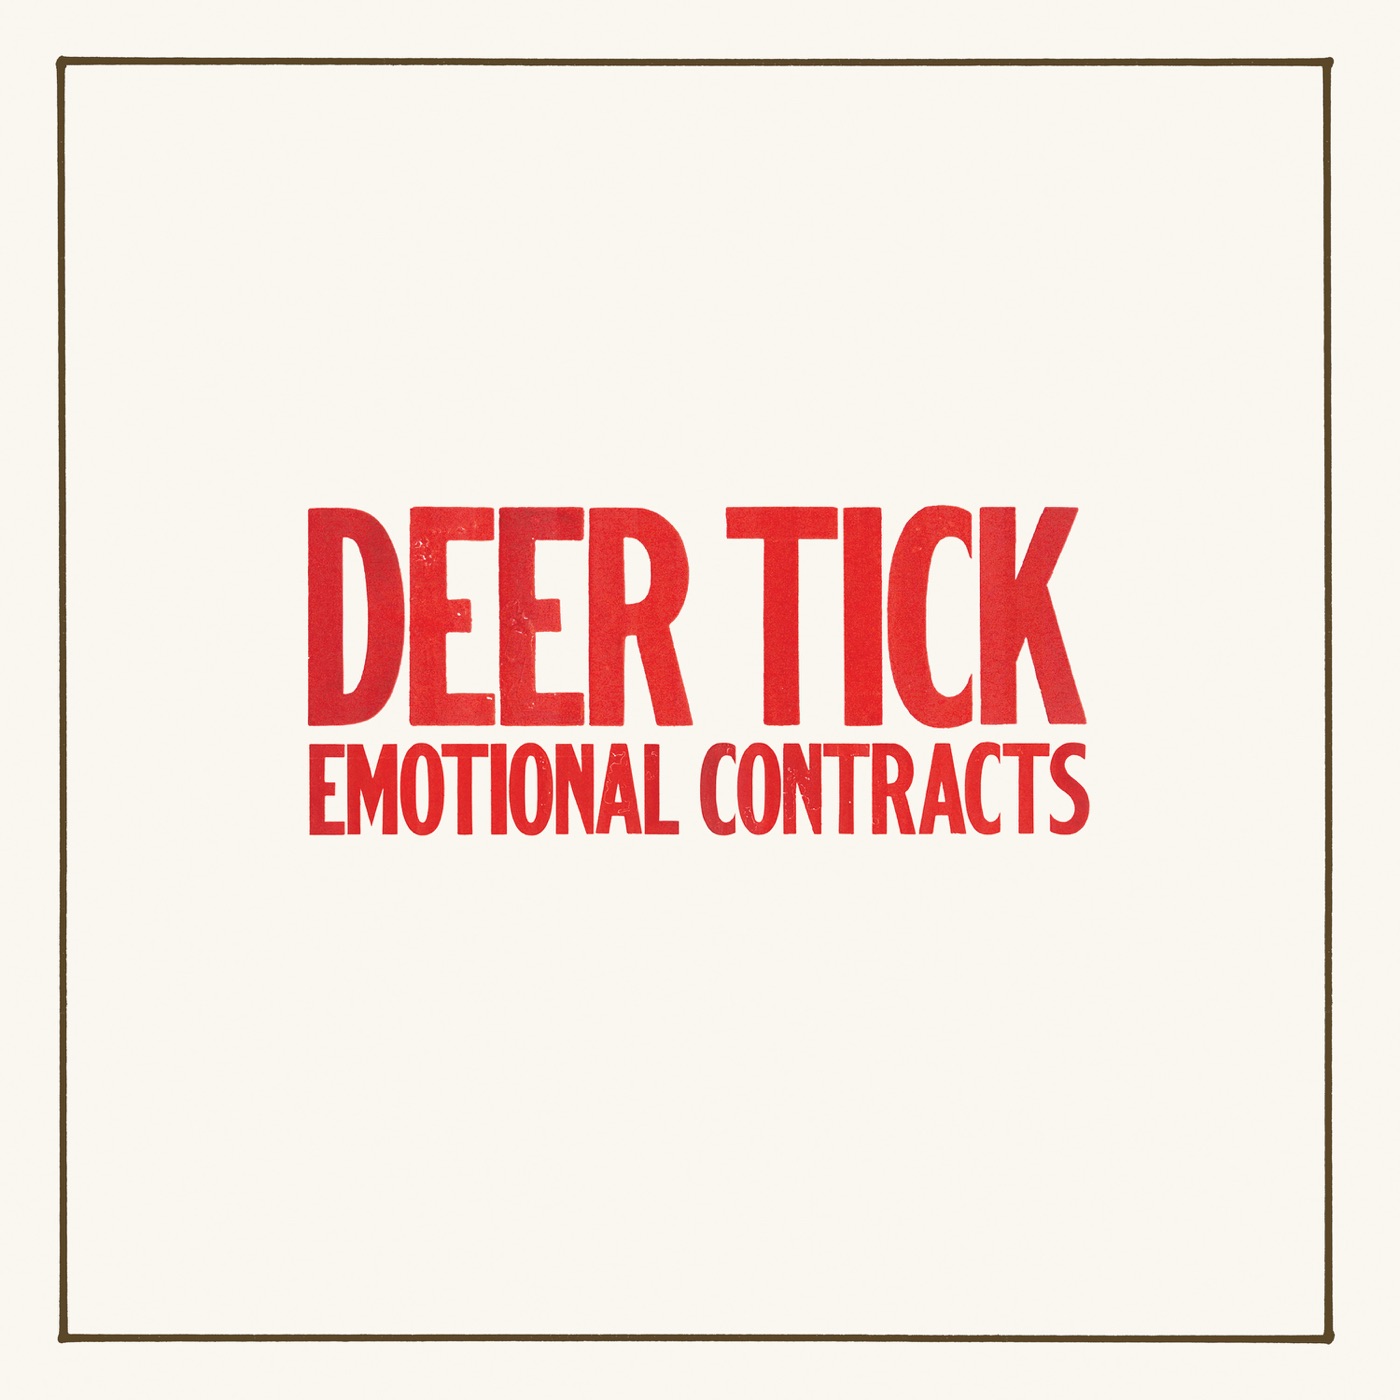 Emotional Contracts by Deer Tick